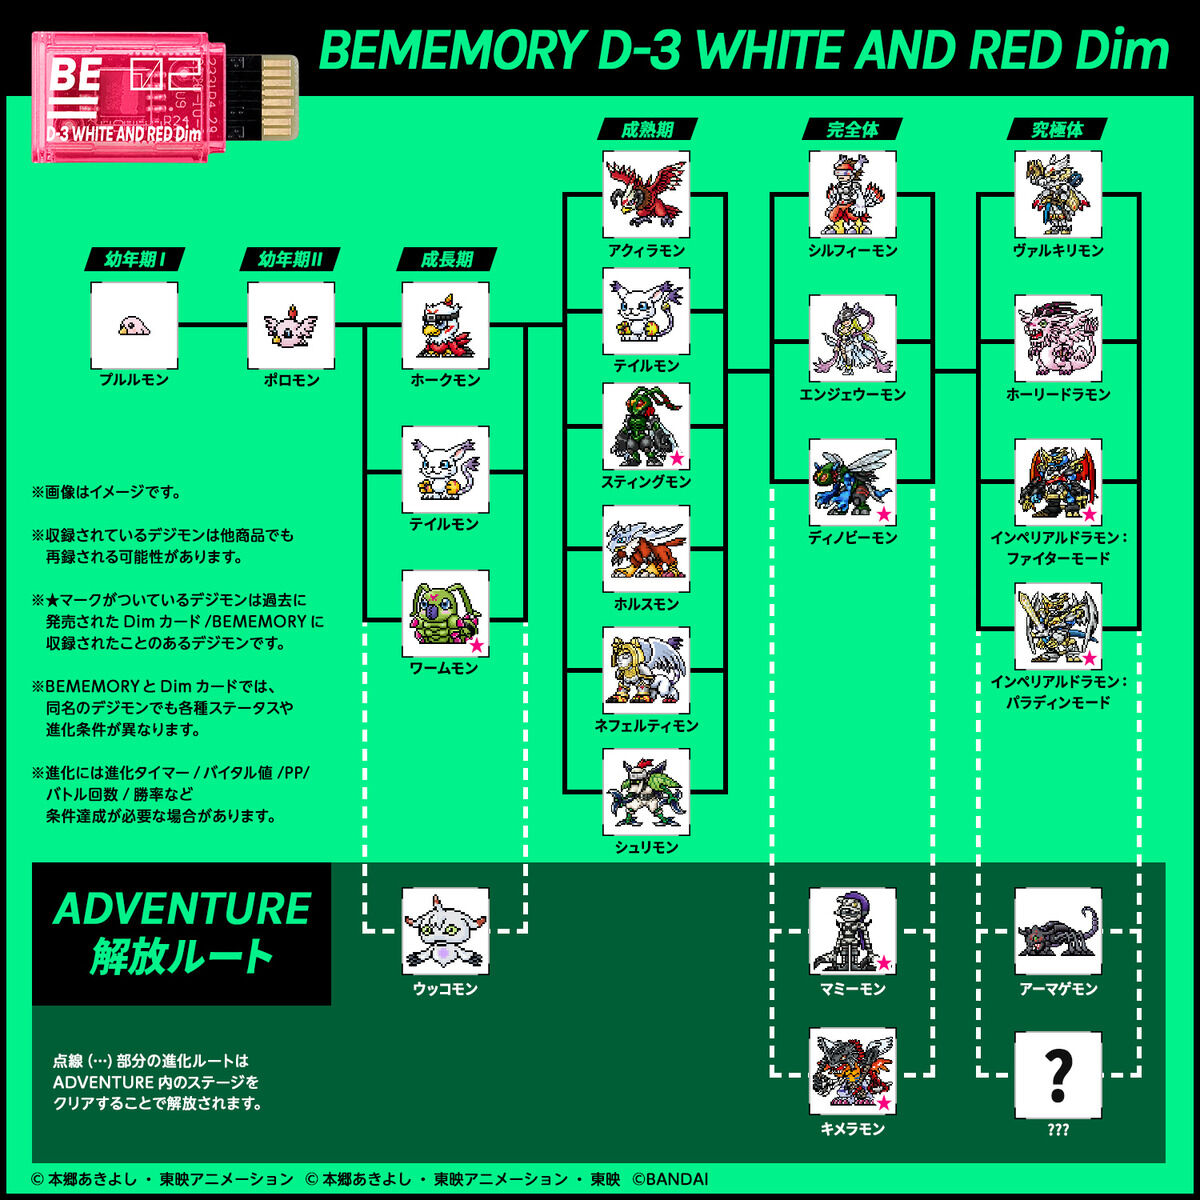 BEMEMORY Digimon Adventure 02 D-3 White and Yellow & D-3 White Red Dim Set